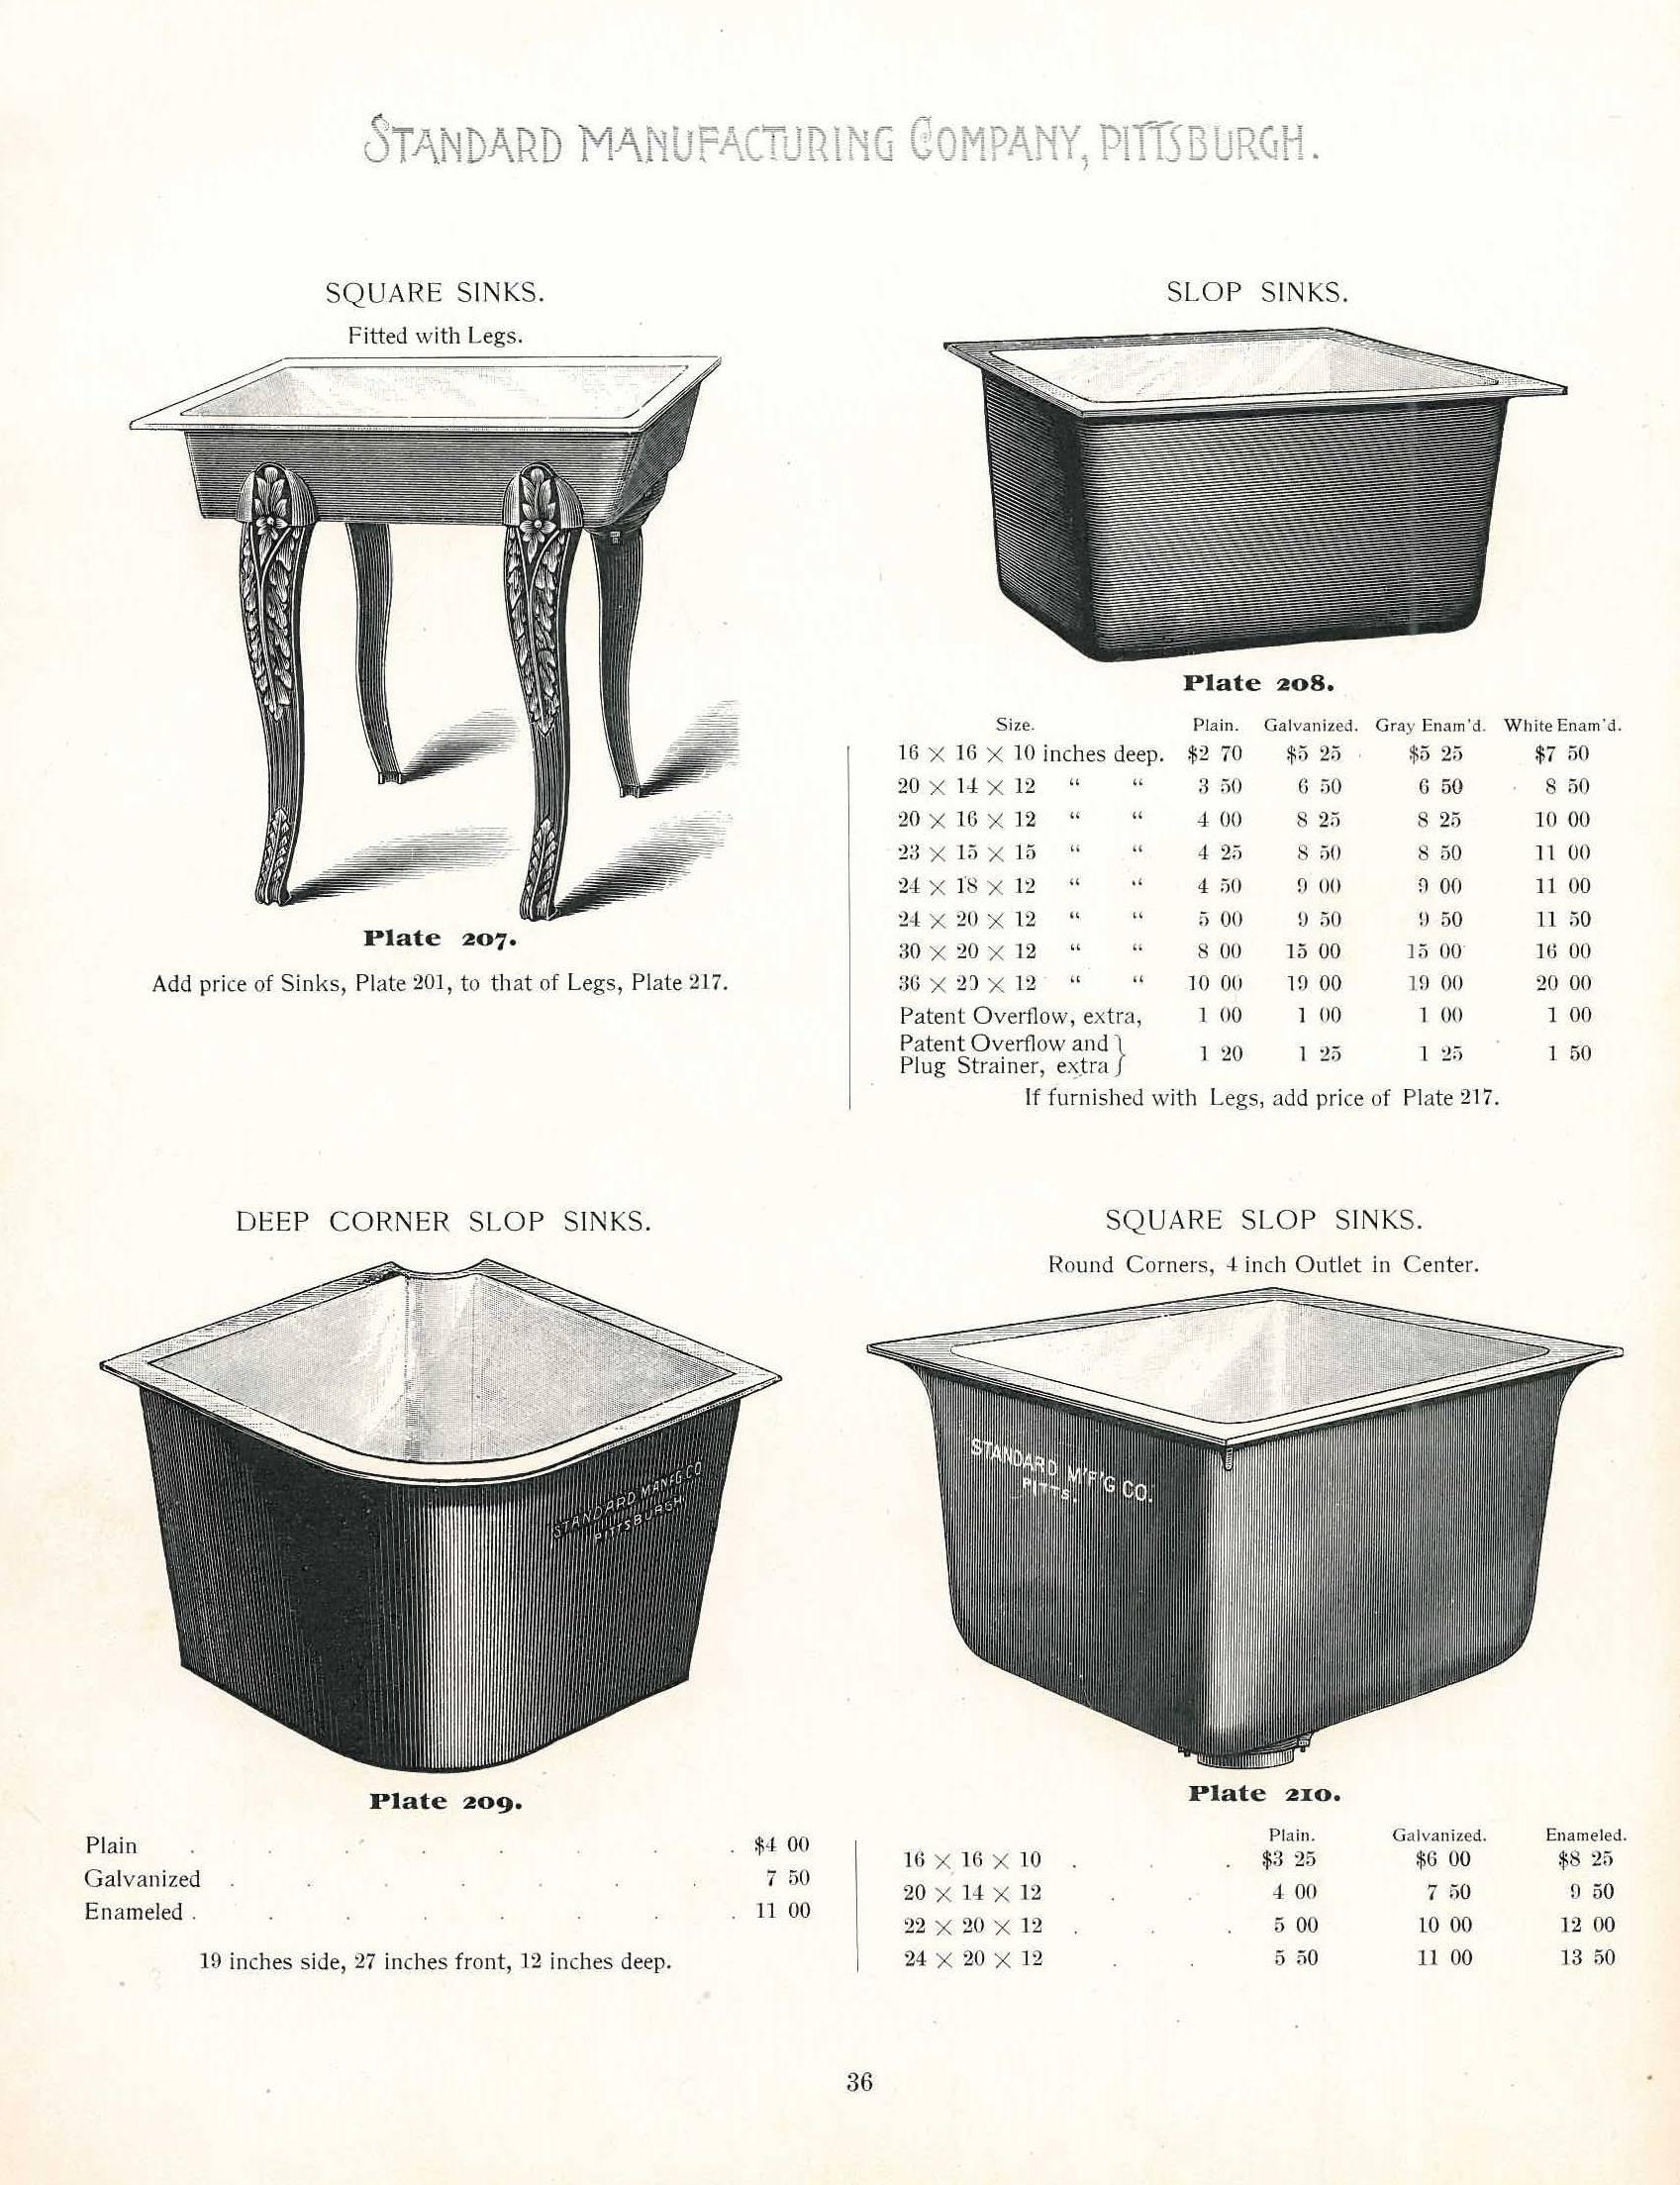 Dating from 1893 this is a fascinating illustrated trade catalogue produced by The Standard Manufacturing Company of Pittsburg showing the range of Bathrooms, Sanitary items and plumbing goods produced by them at the end the 19th century, with 270